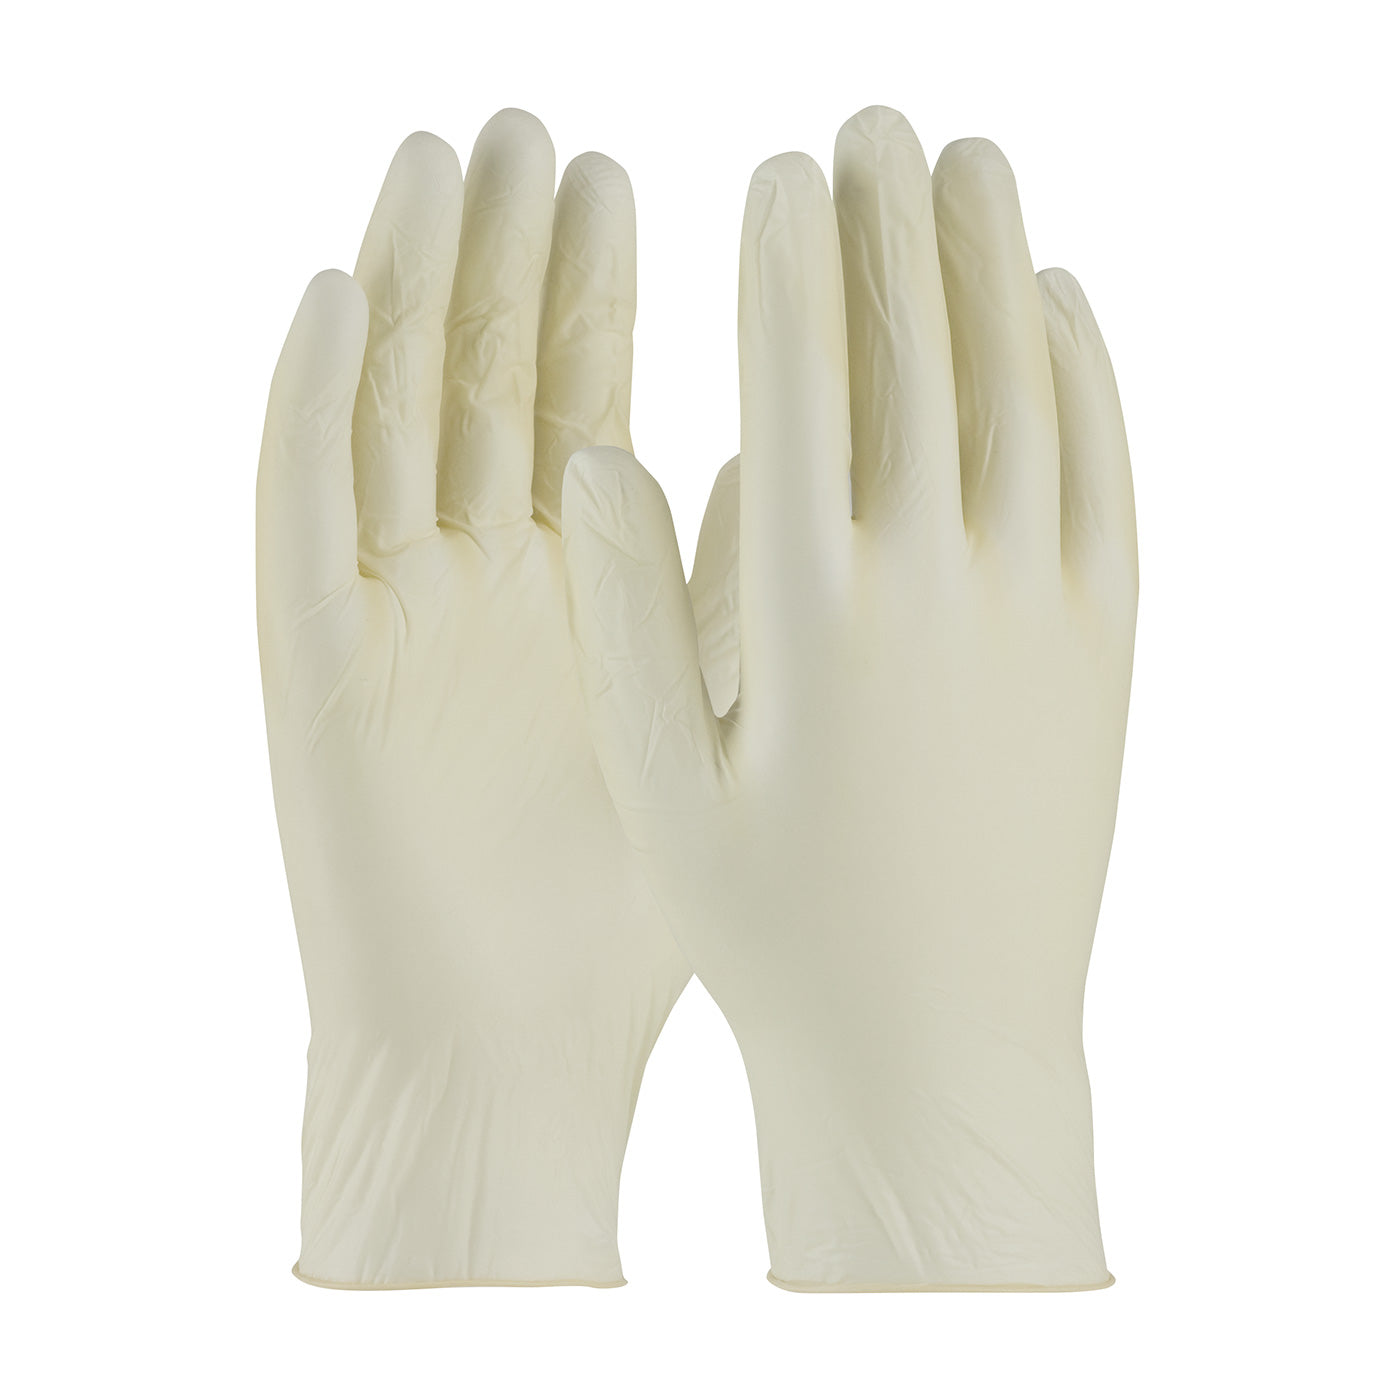 Ambi-dex 64-346PF/XL Food Grade Disposable Non-Latex Synthetic Glove, Powder-Free with Smooth Grip - 4 Mil